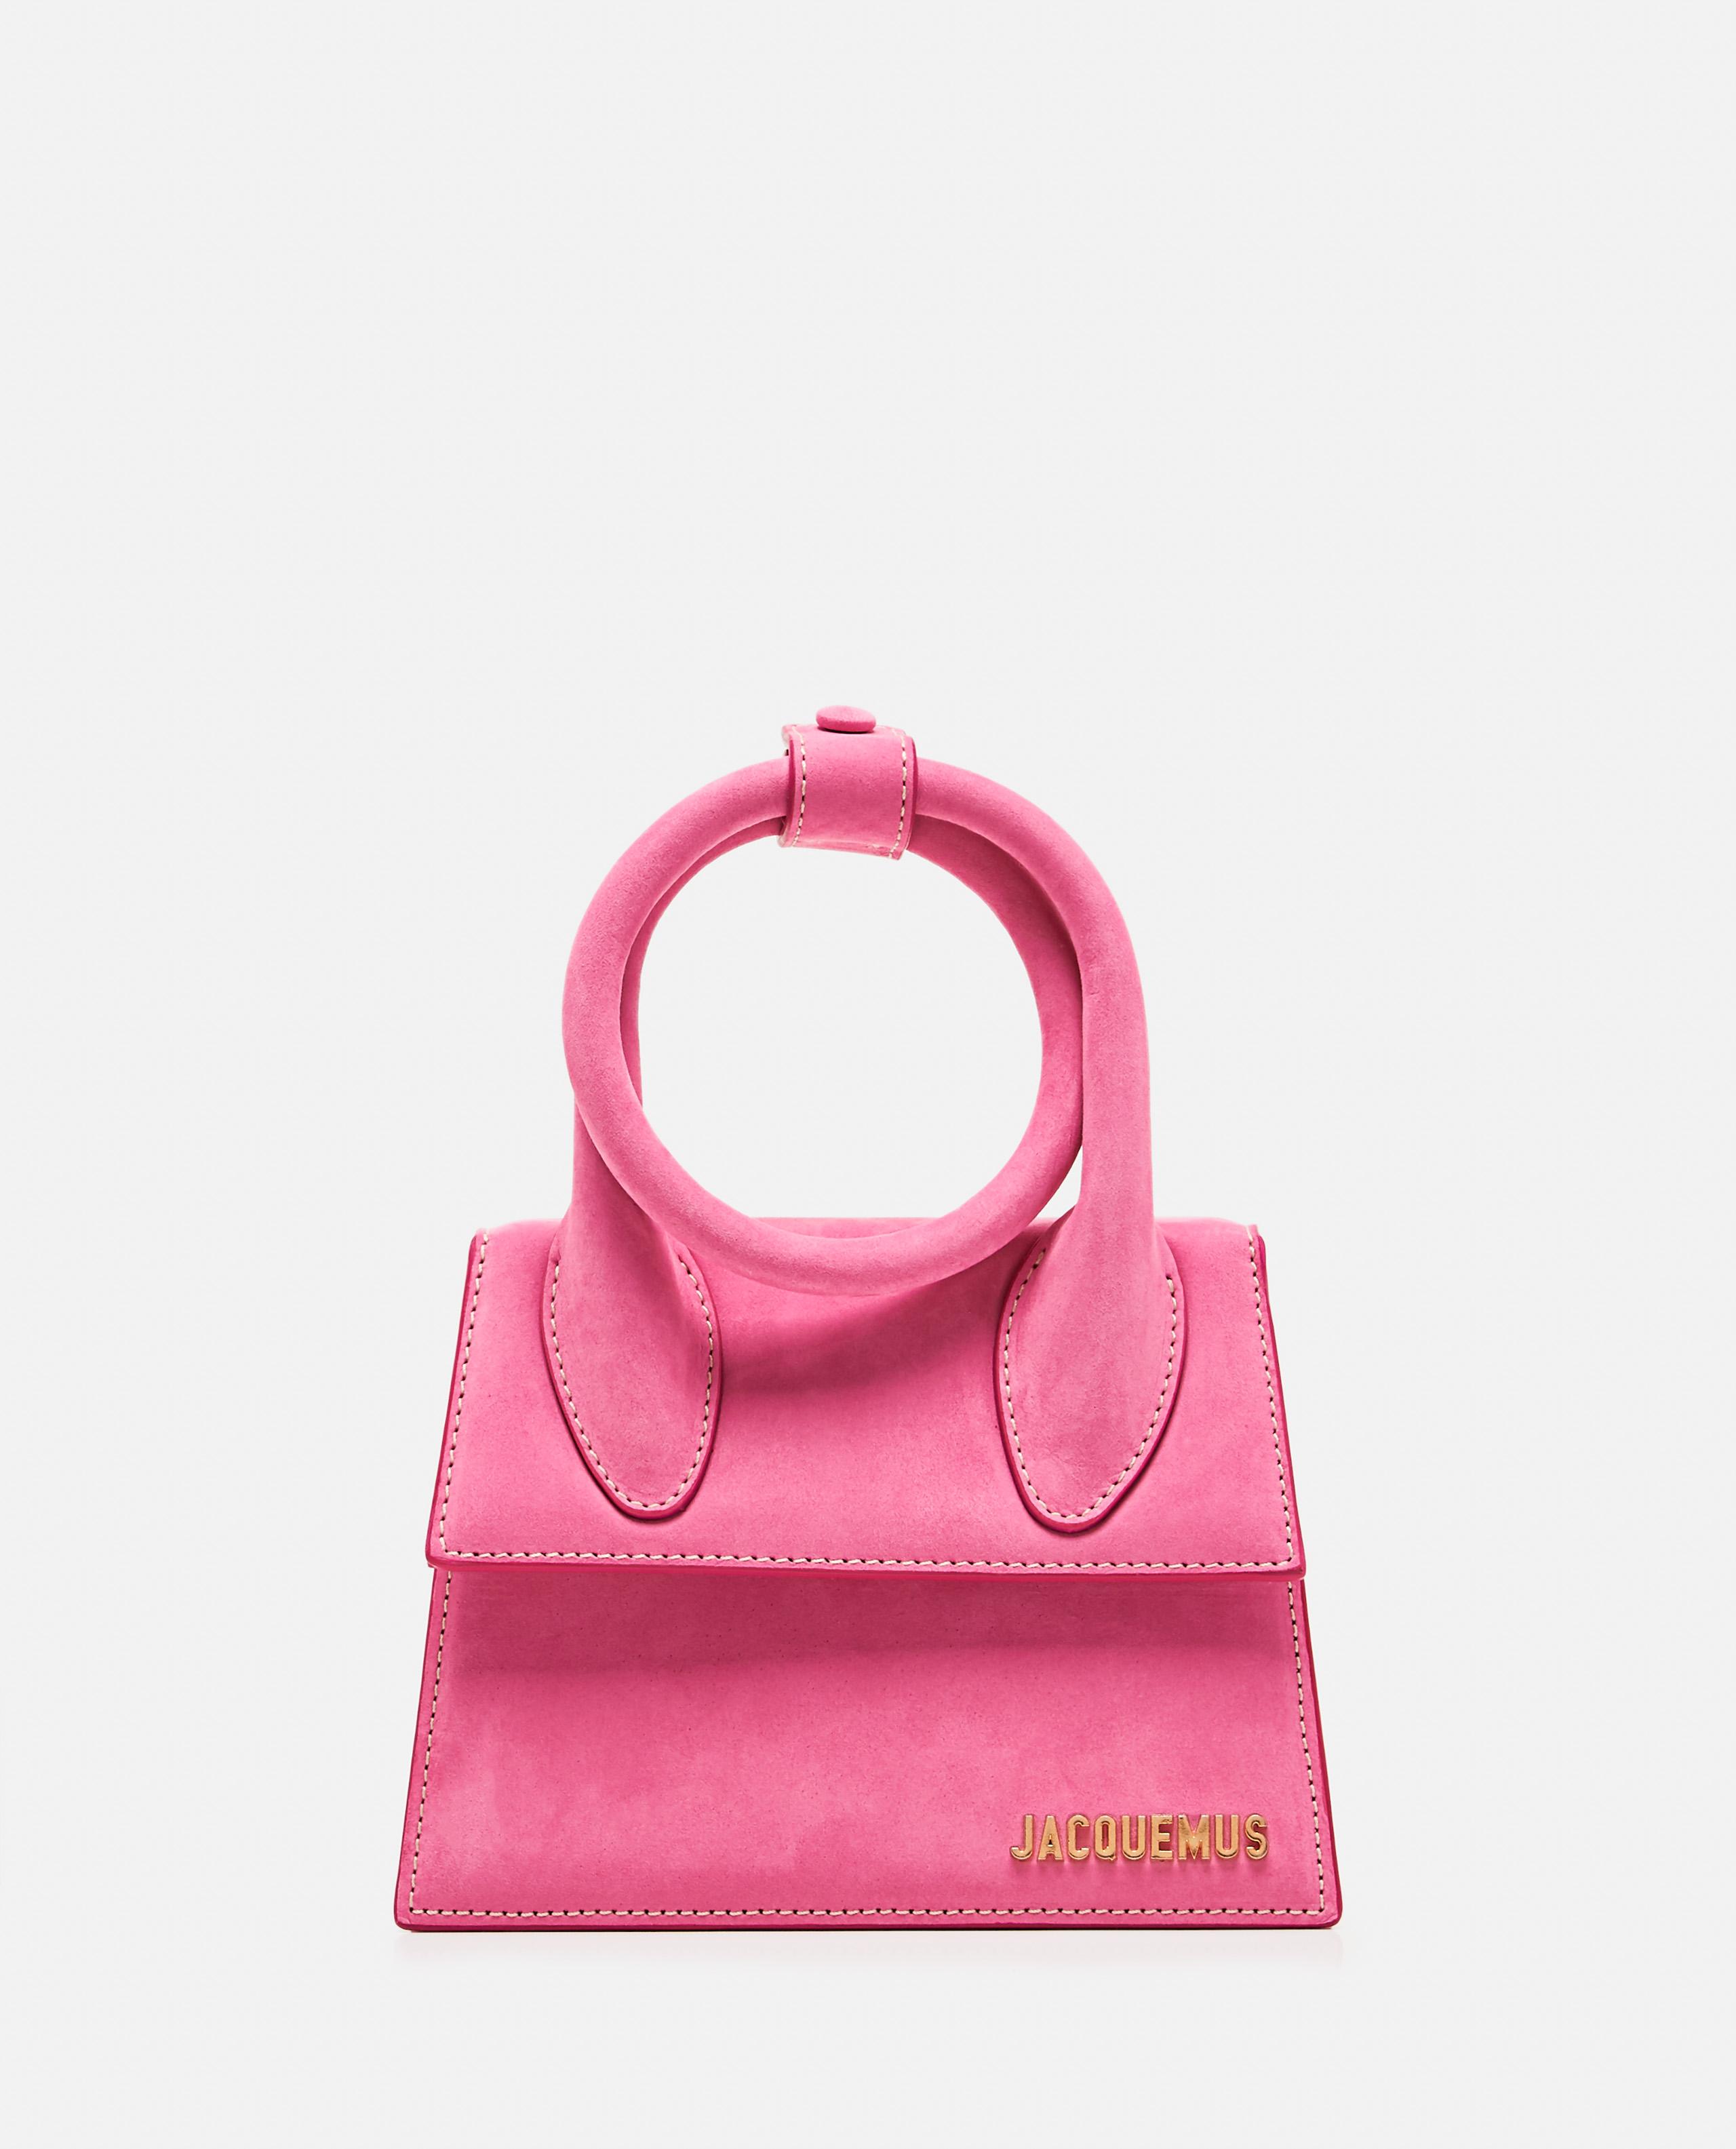 Jacquemus Le Chiquito Noeud Bag in Pink - Lyst